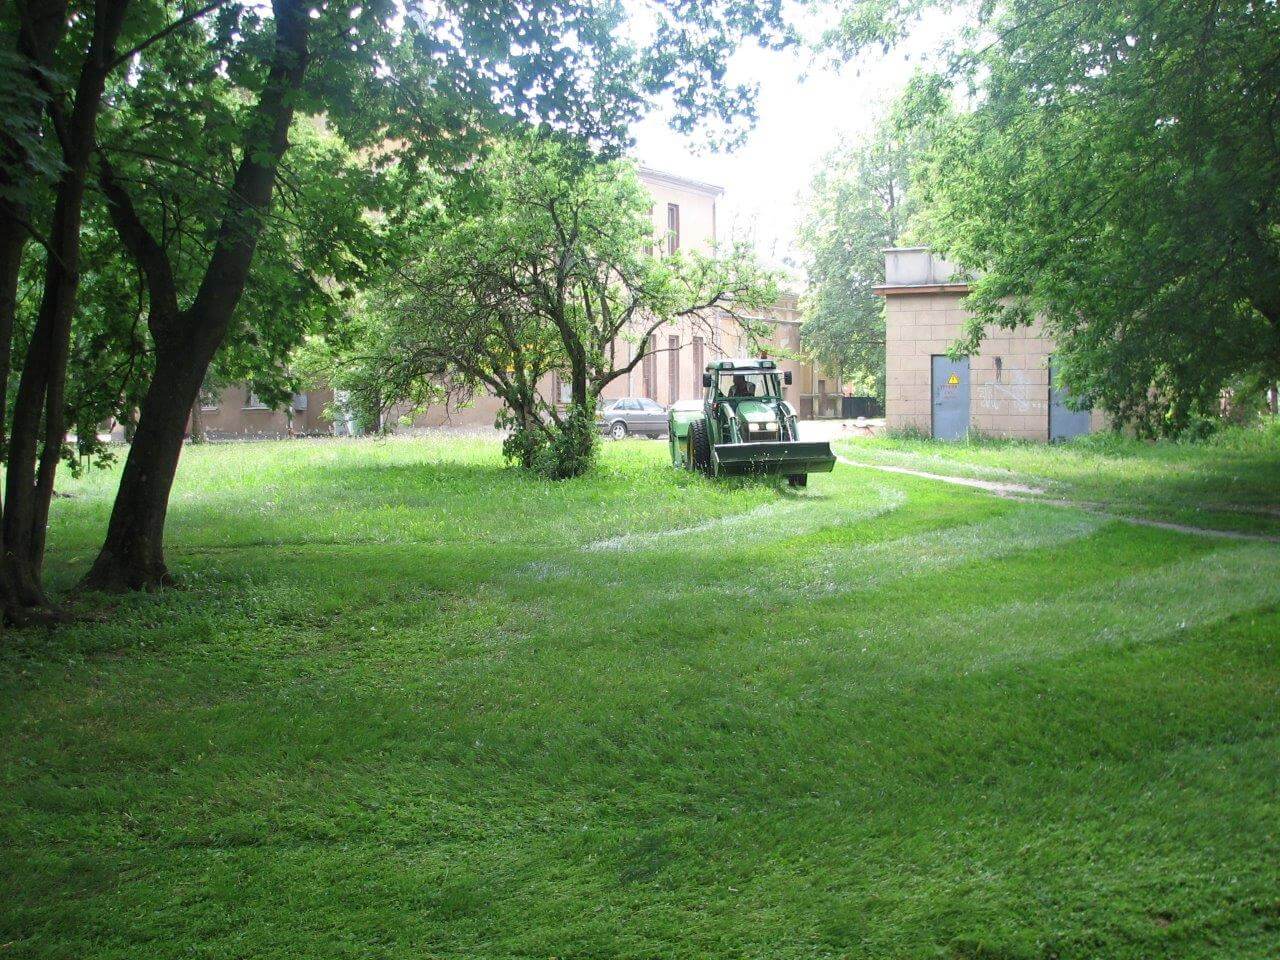 Mowing and ground clearance 4